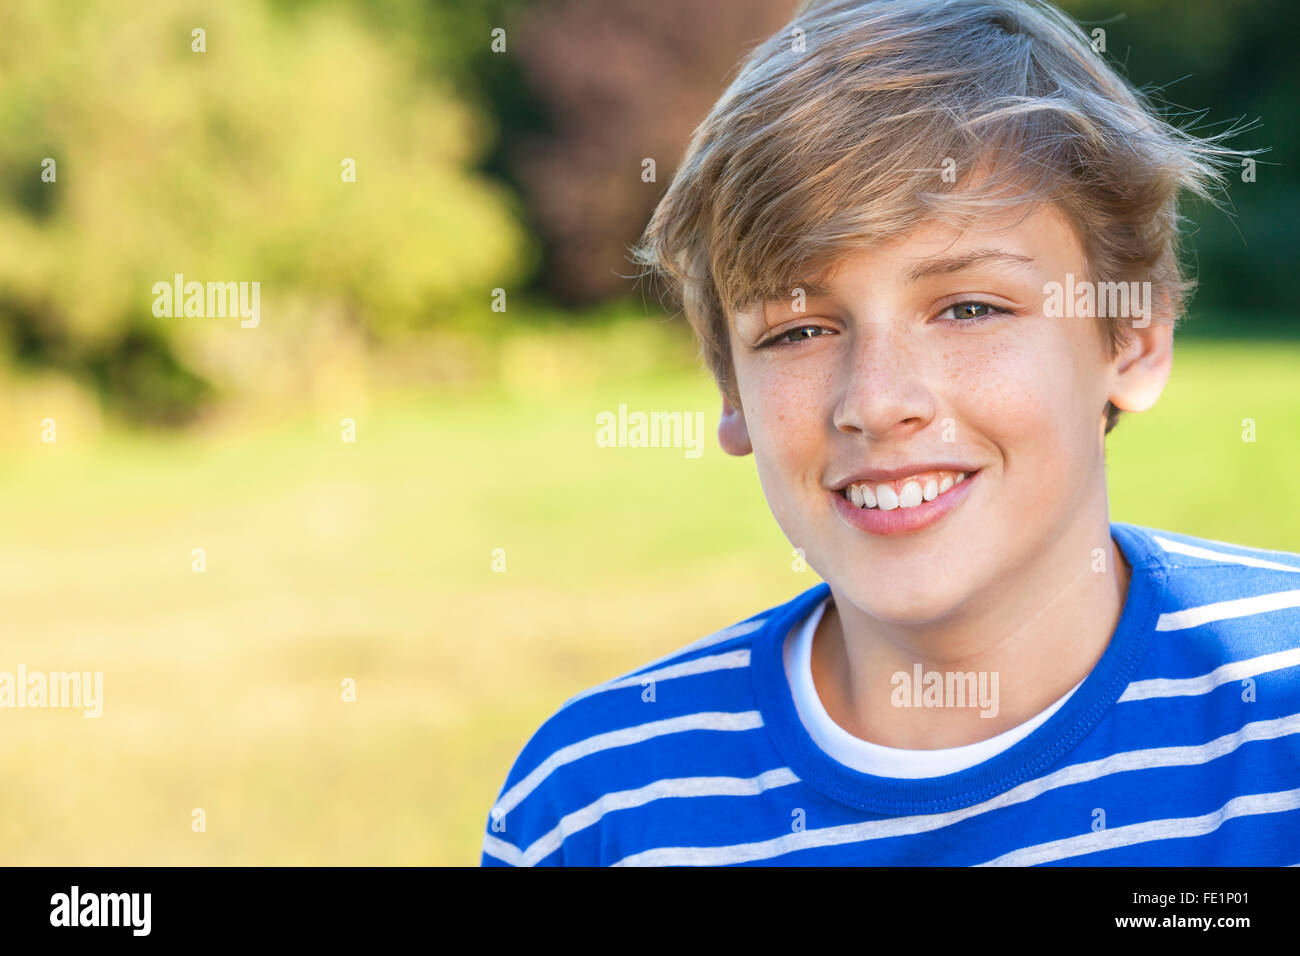 Young happy smiling male boy teenager blond child outside in summer sunshine wearing a blue sweatshirt Stock Photo